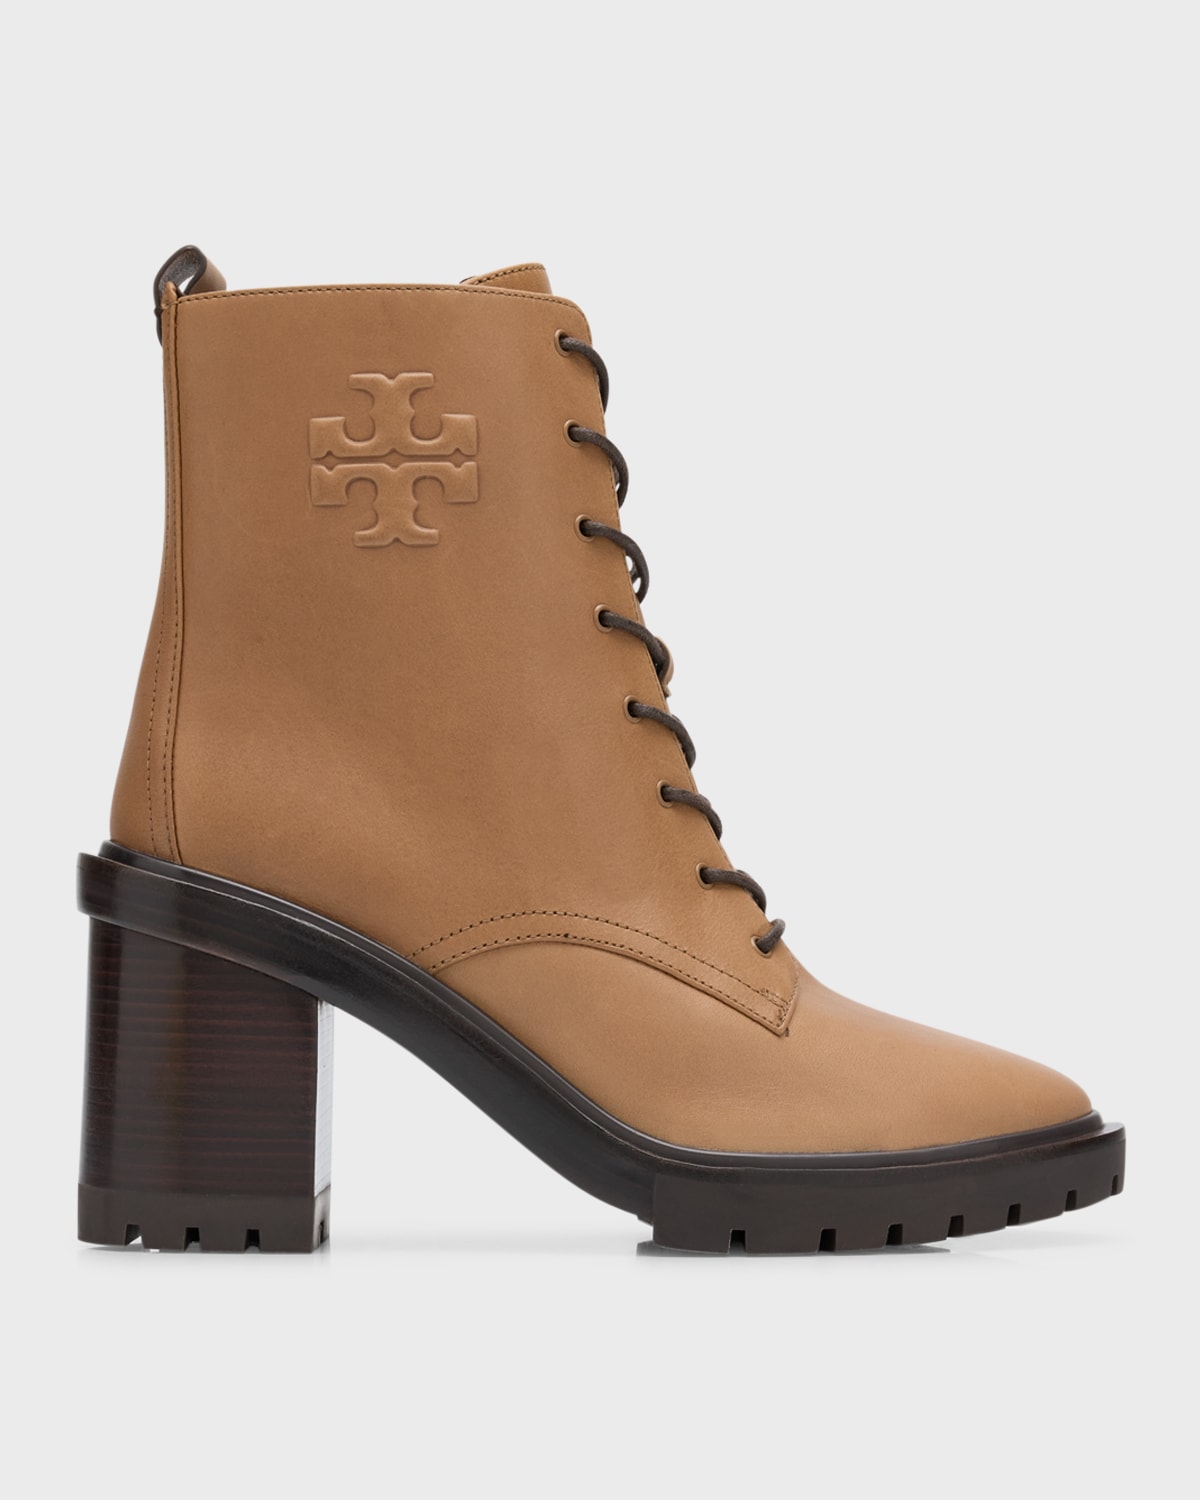 TORY BURCH LEATHER DOUBLE T LACE-UP ANKLE BOOTS